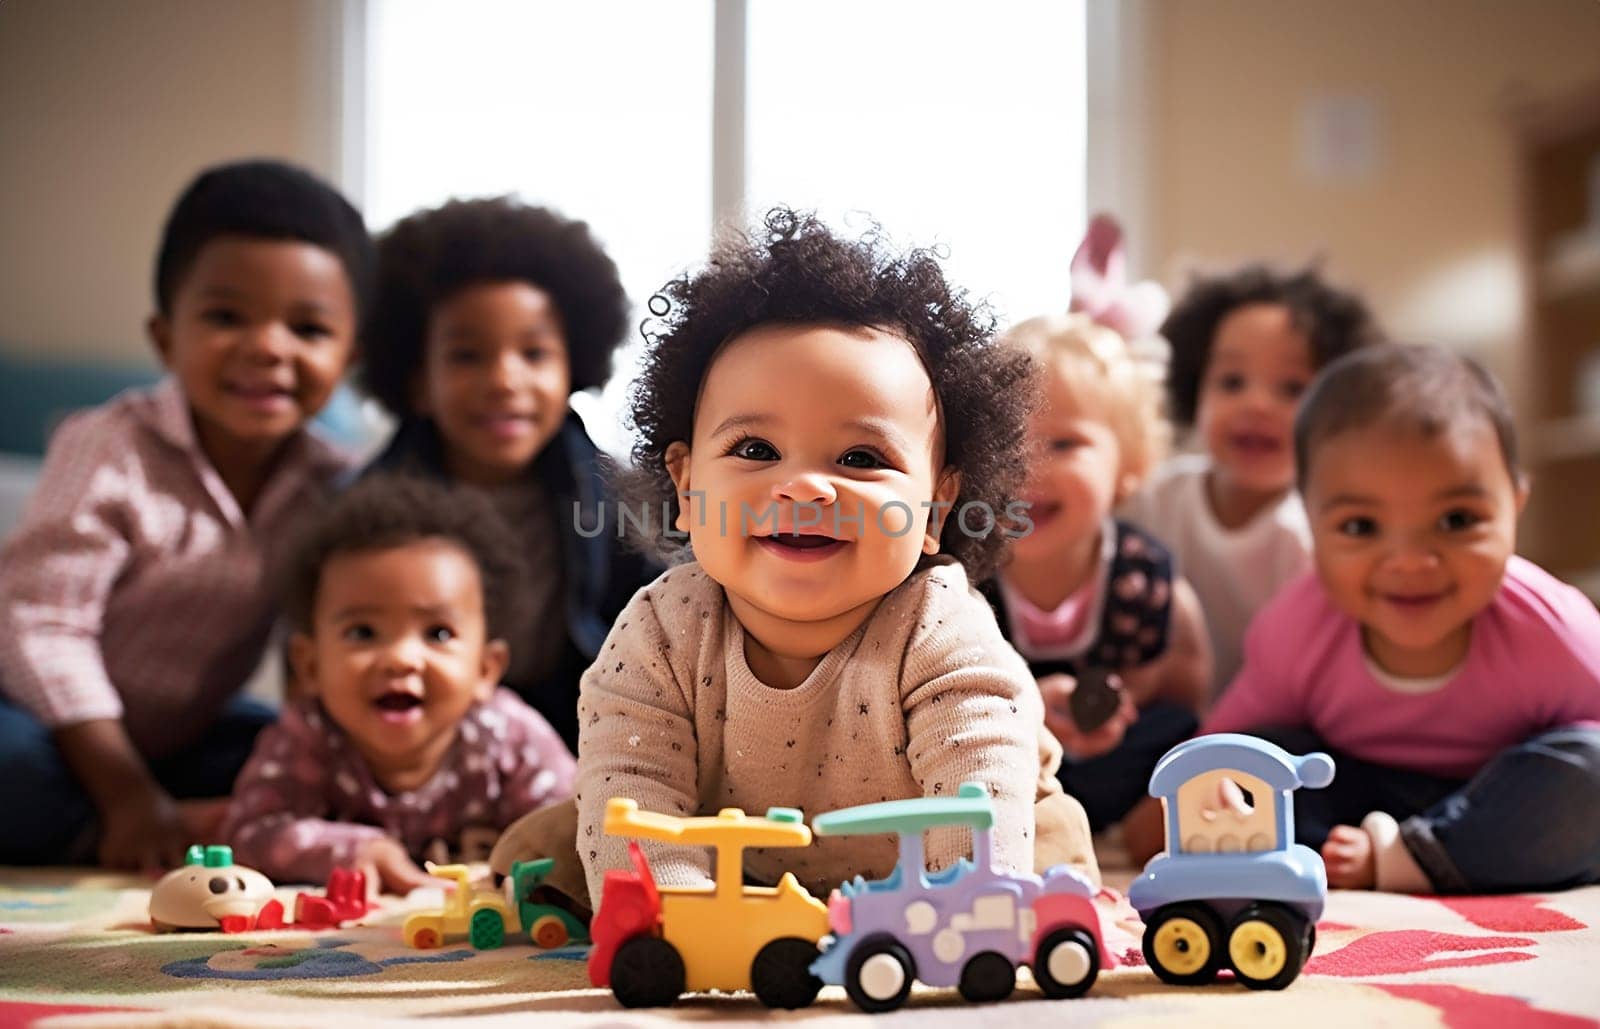 multicultural daycare center with African American toddler babies. Group of workers with babies in nursery or kindergarten playful. by Annebel146